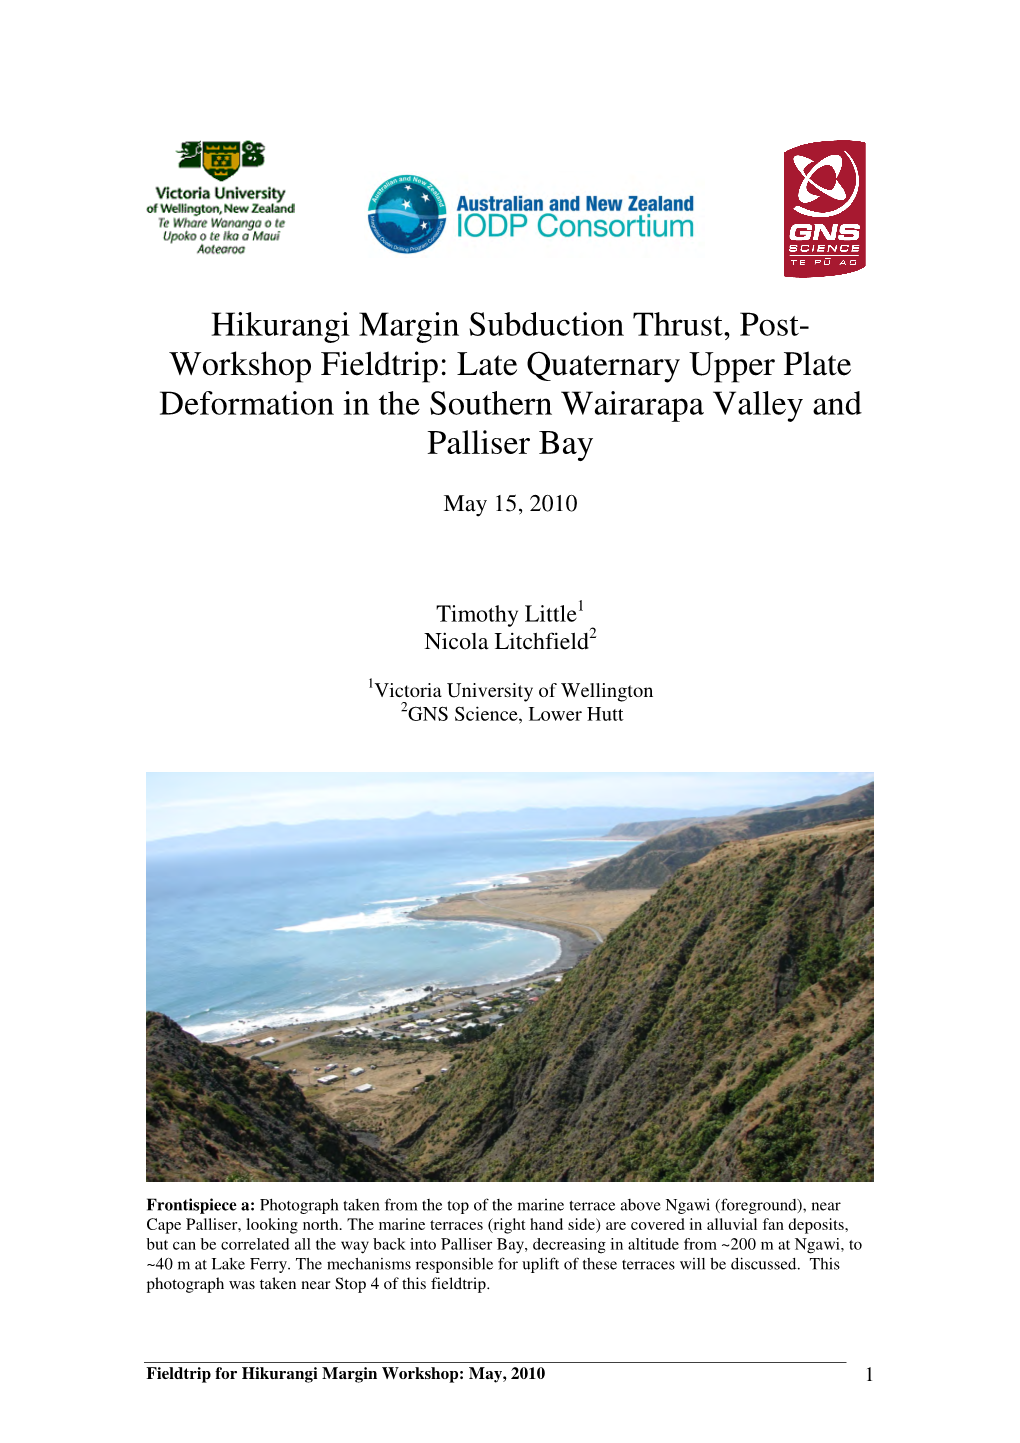 Late Quaternary Upper Plate Deformation in the Southern Wairarapa Valley and Palliser Bay